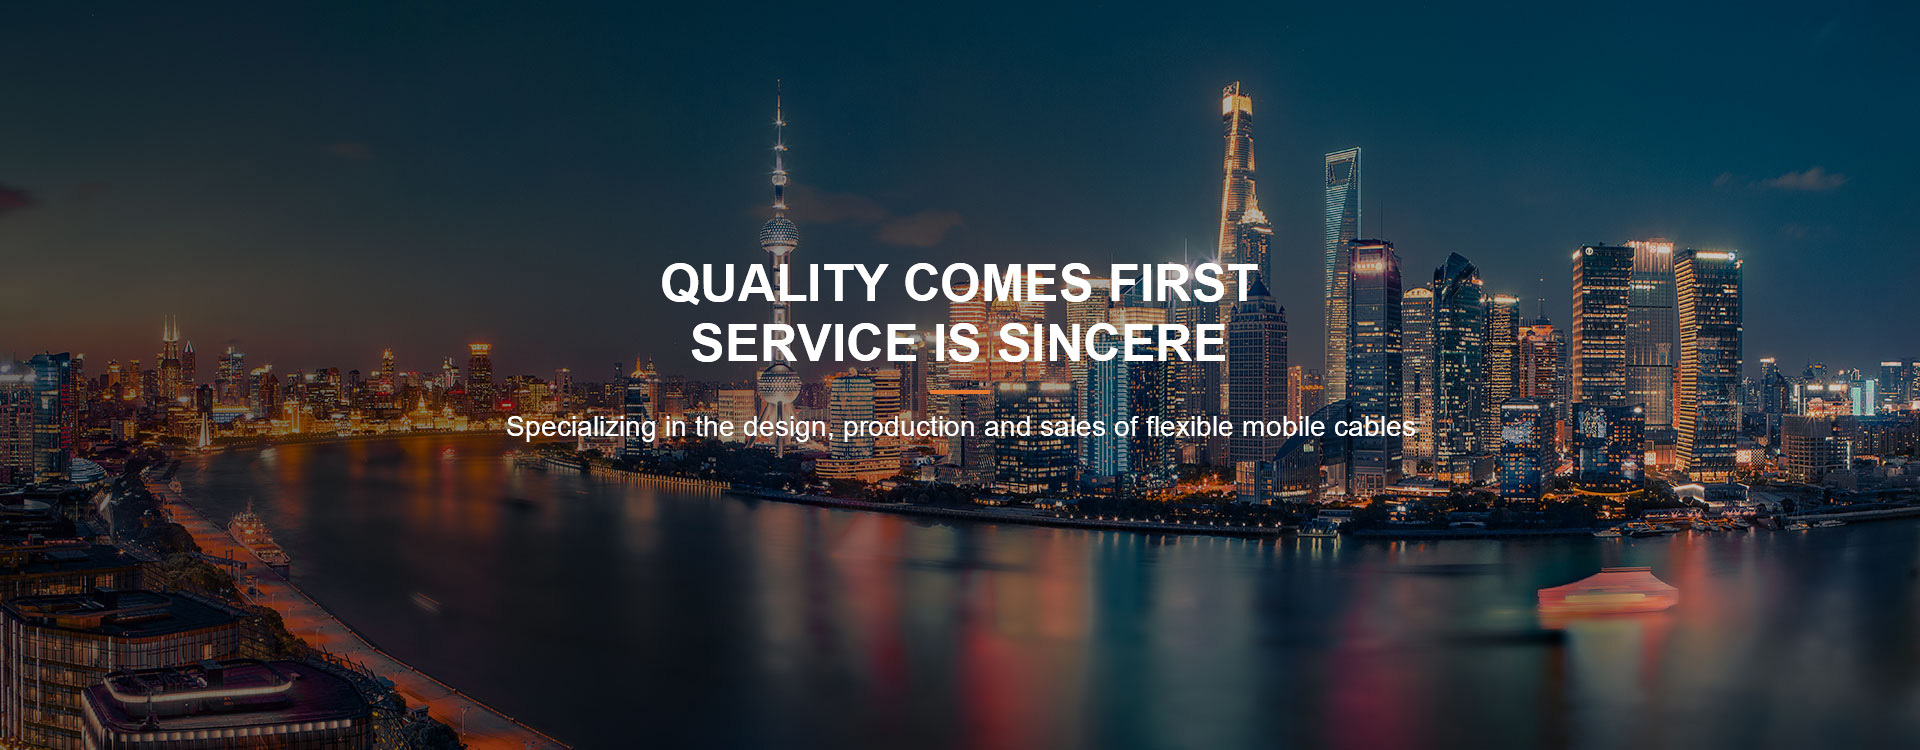 QUALITY COMES FIRST, SERVICE IS SINCERE